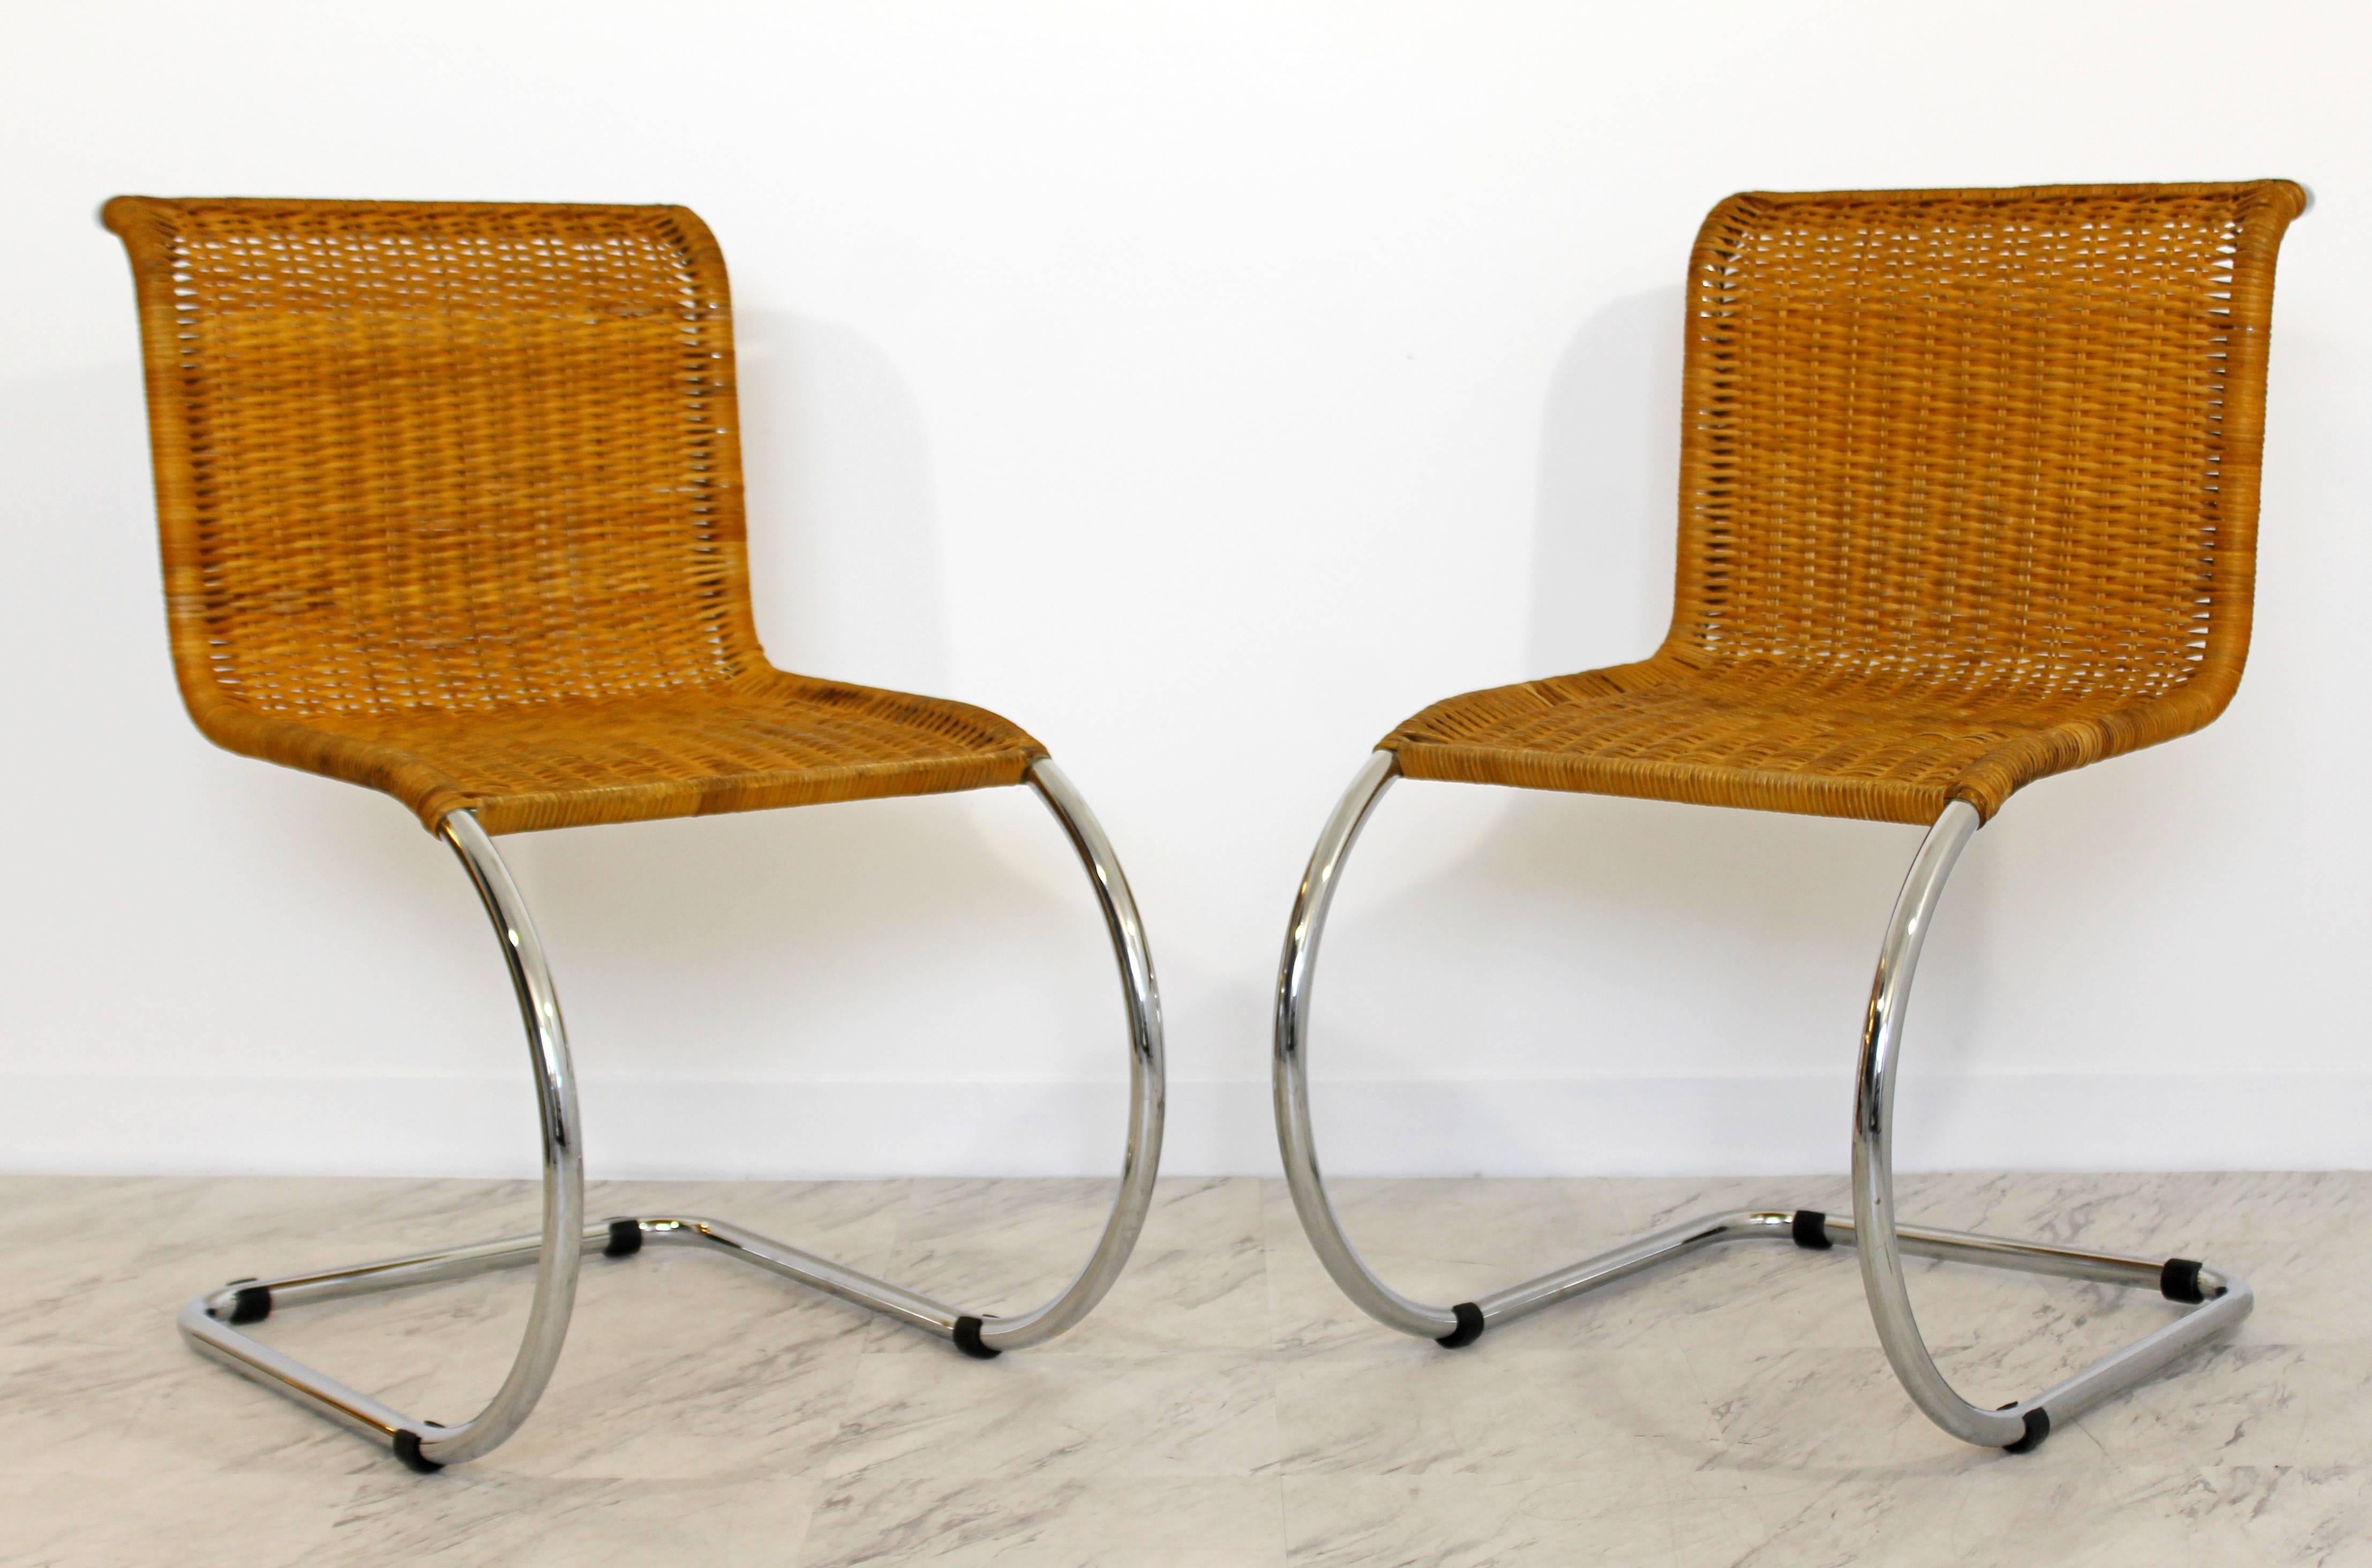 Italian Mid-Century Modern Mies van der Rohe Set of Four Cantilever Wicker Chrome Chairs